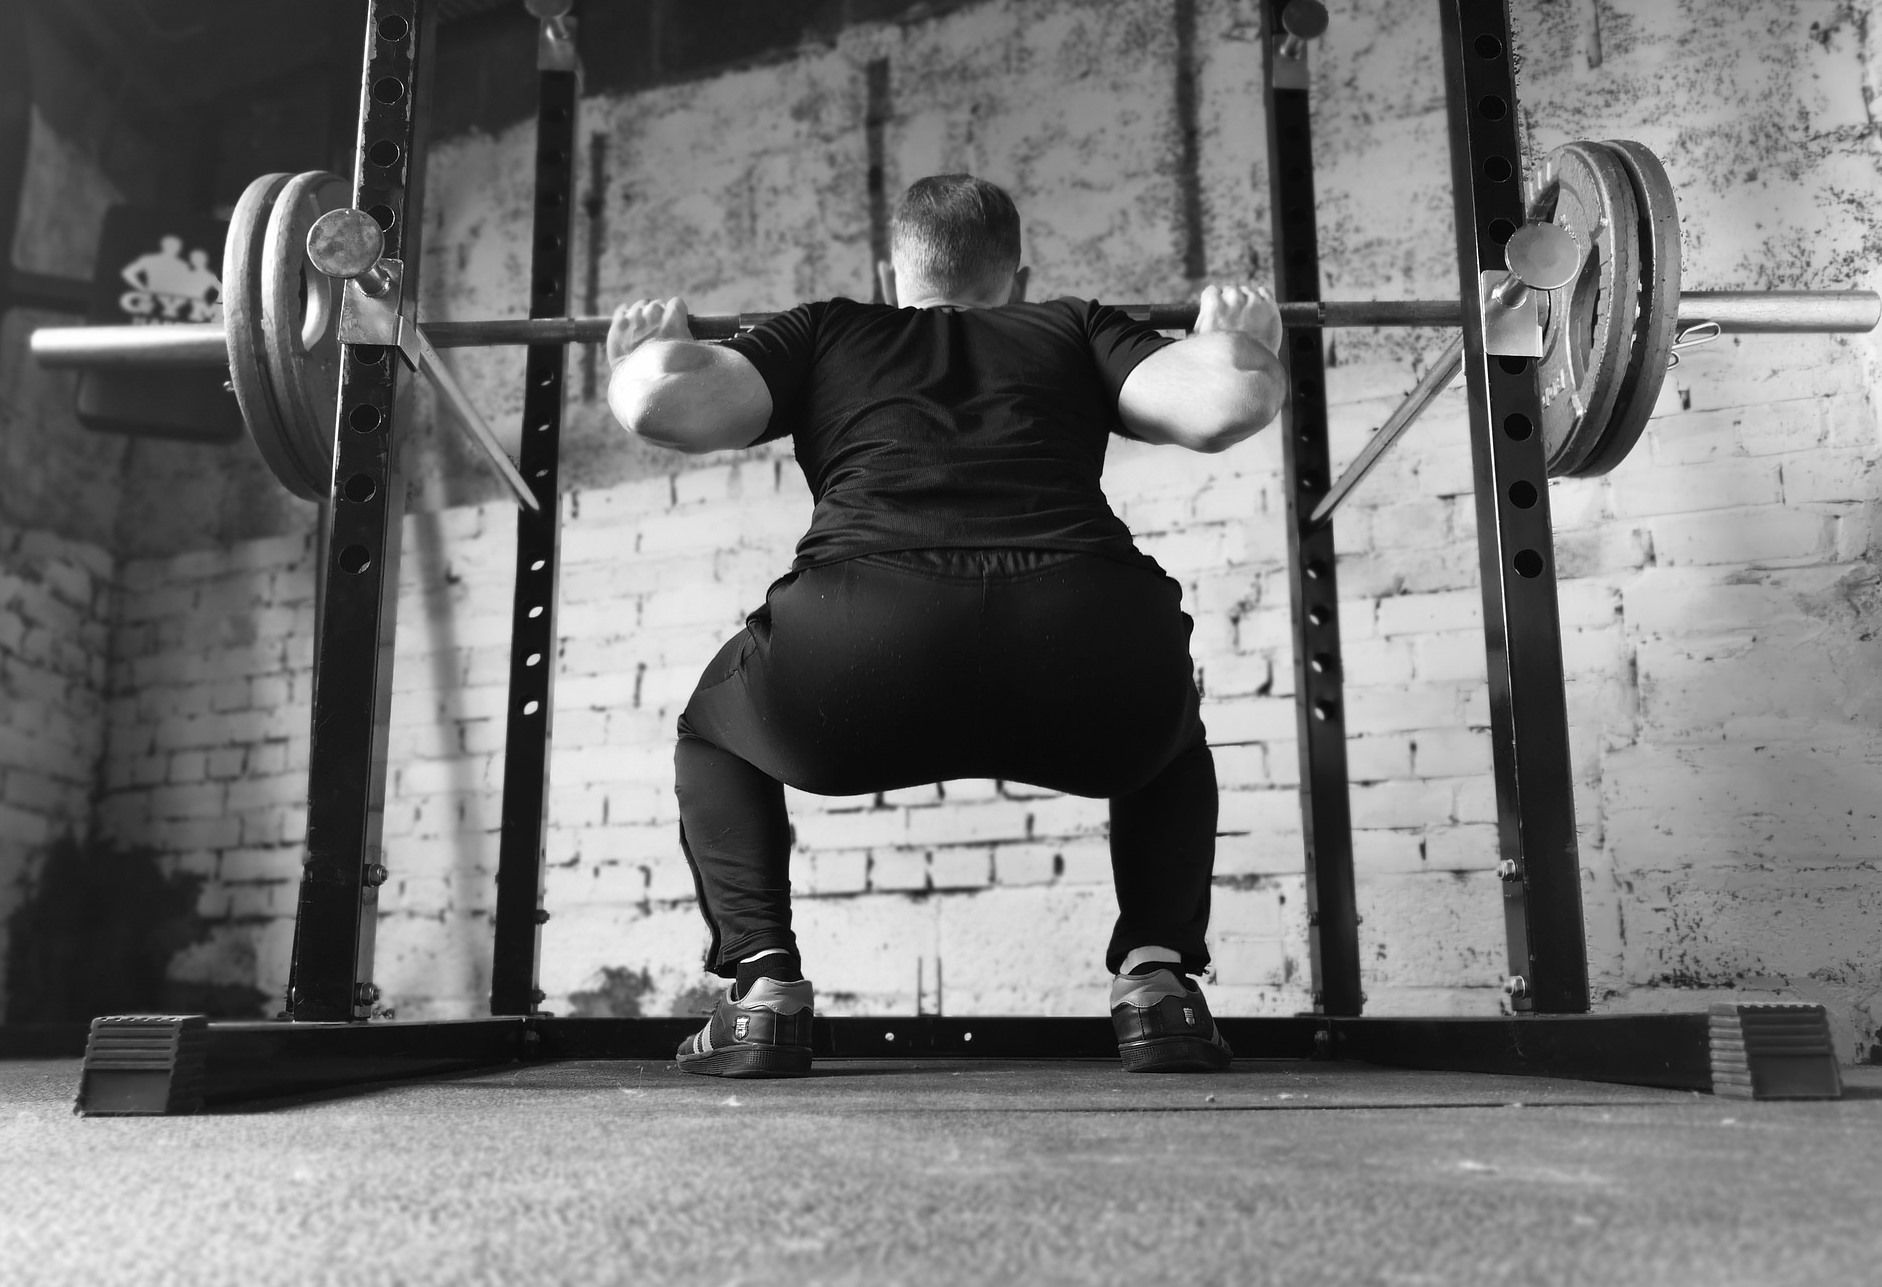 Weightlifting Shoes vs. Plates to Elevate Heels for the Squat